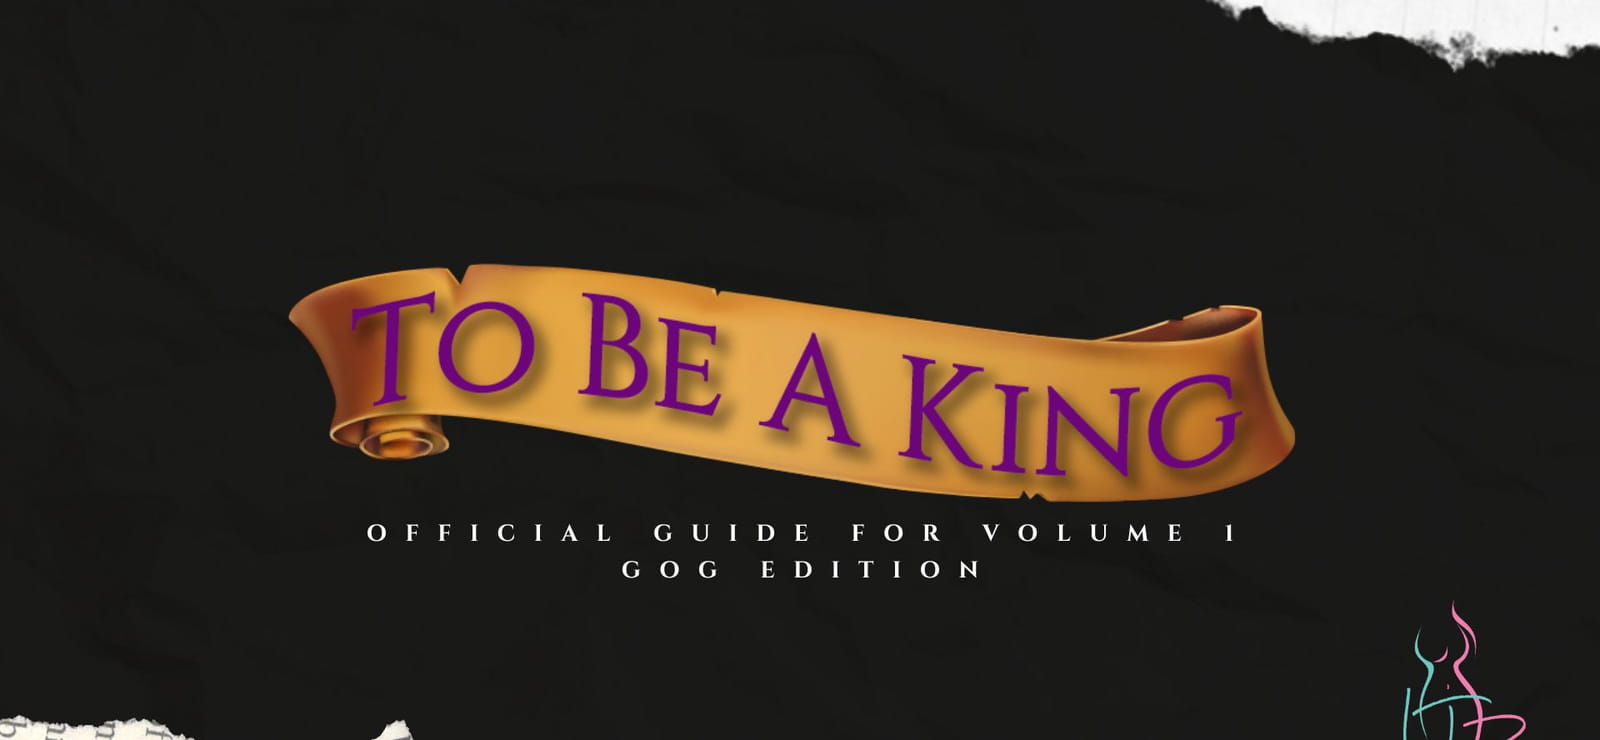 To Be A King Volume 1 - Official Guide